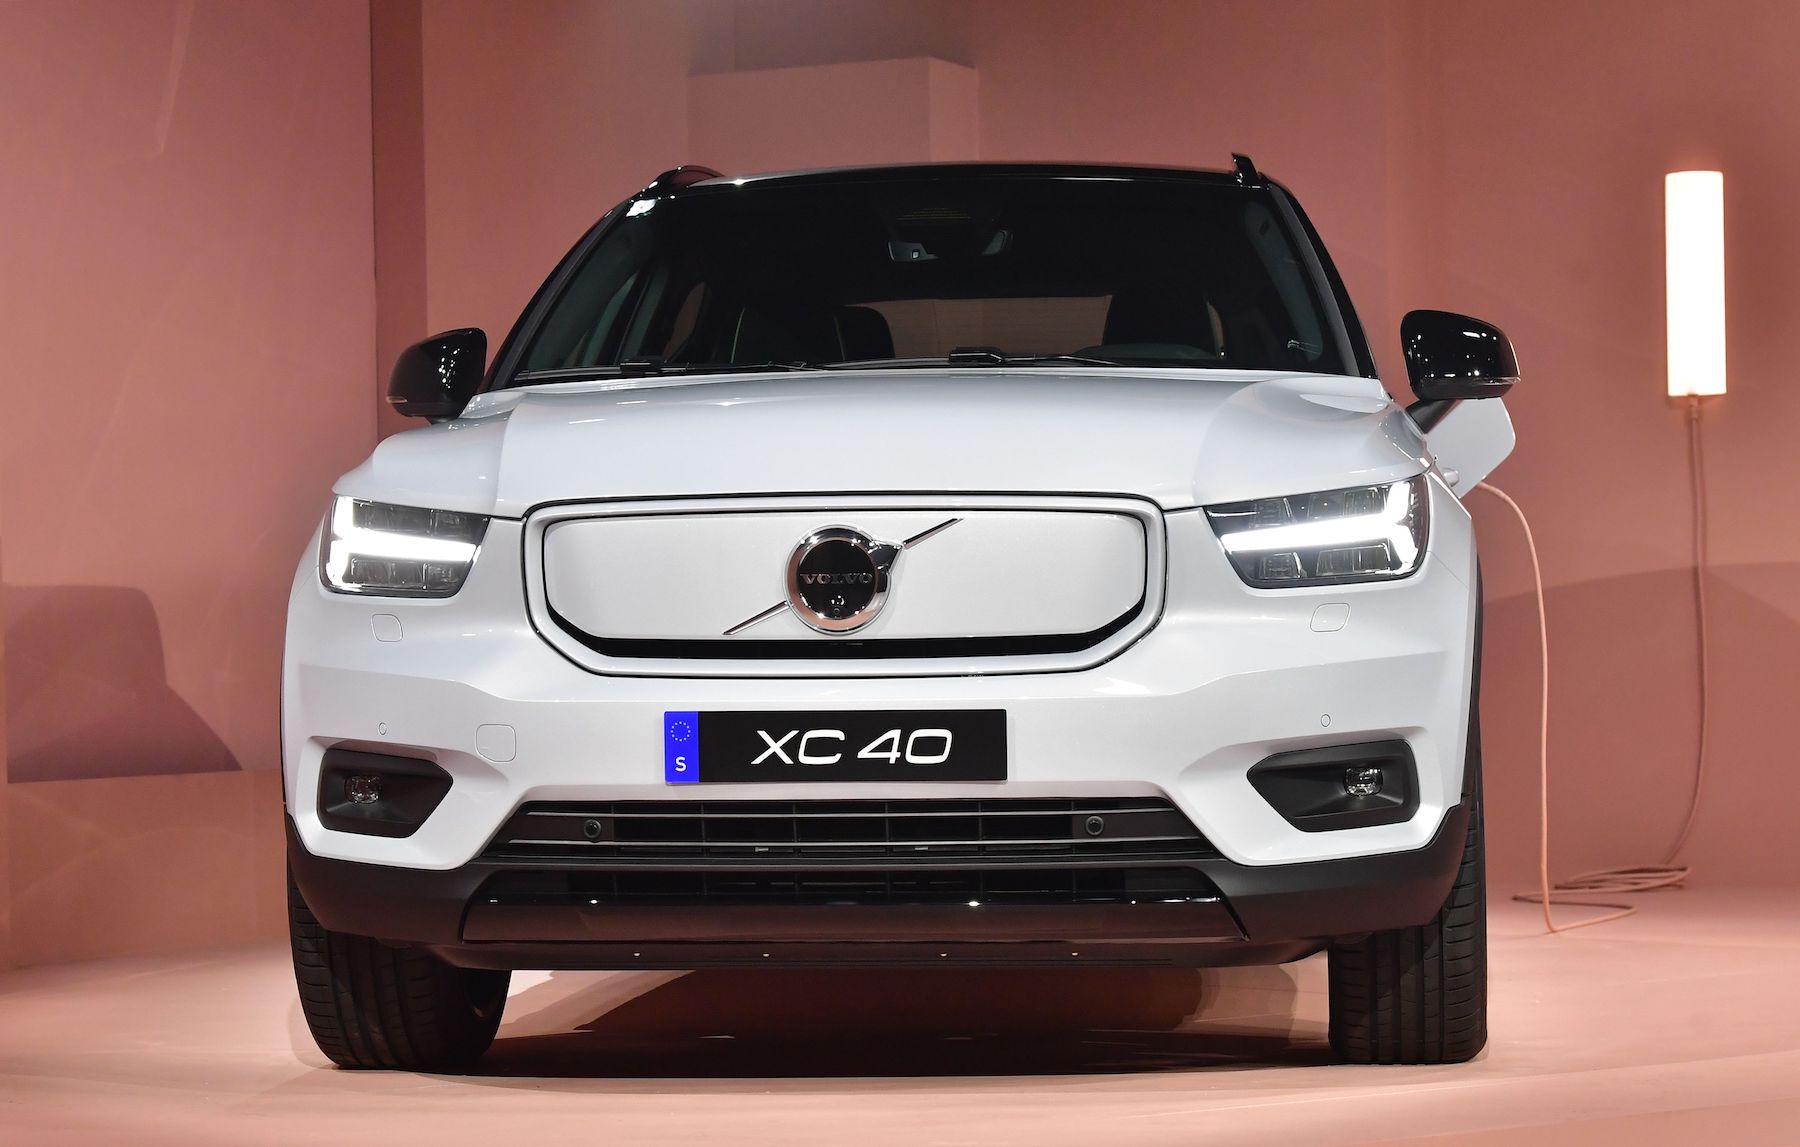 Swedish automaker Volvo unveils its first electric vehicle, the XC40 Recharge EV, during an event in Los Angeles, California